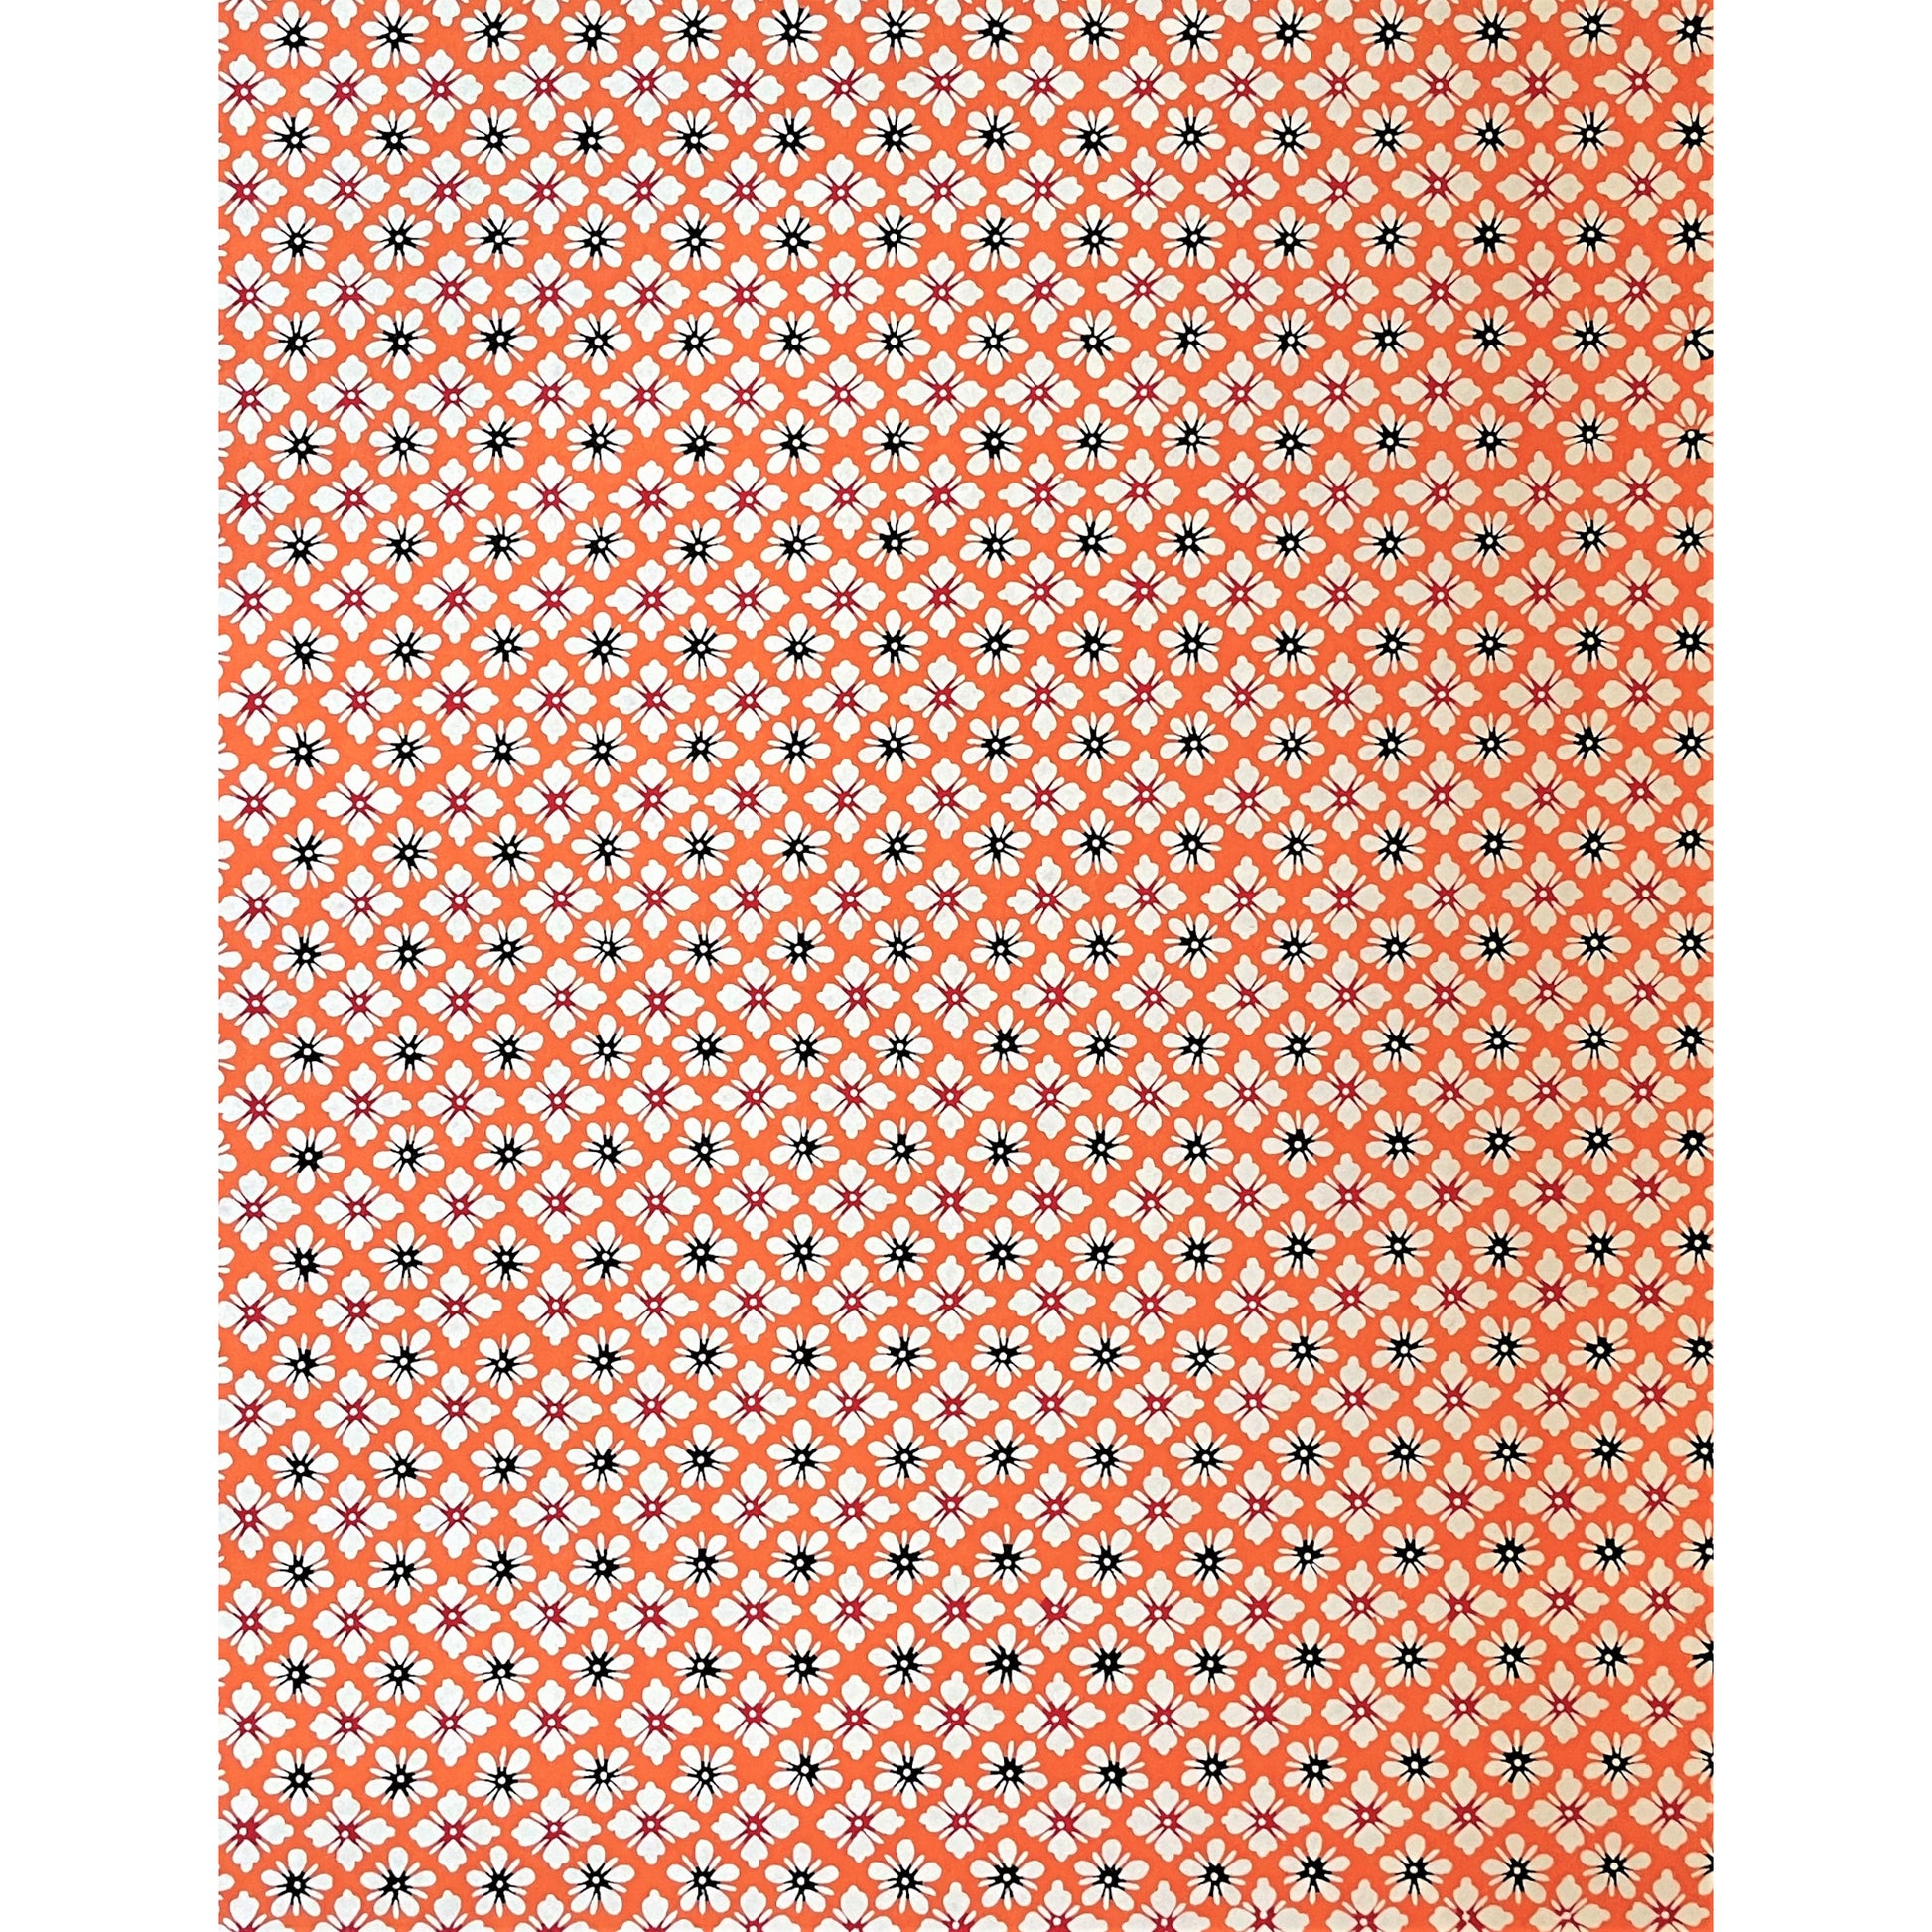 japanese stencil-dyed handmade paper with small scale floral repeat in orange and cream, full sheet view